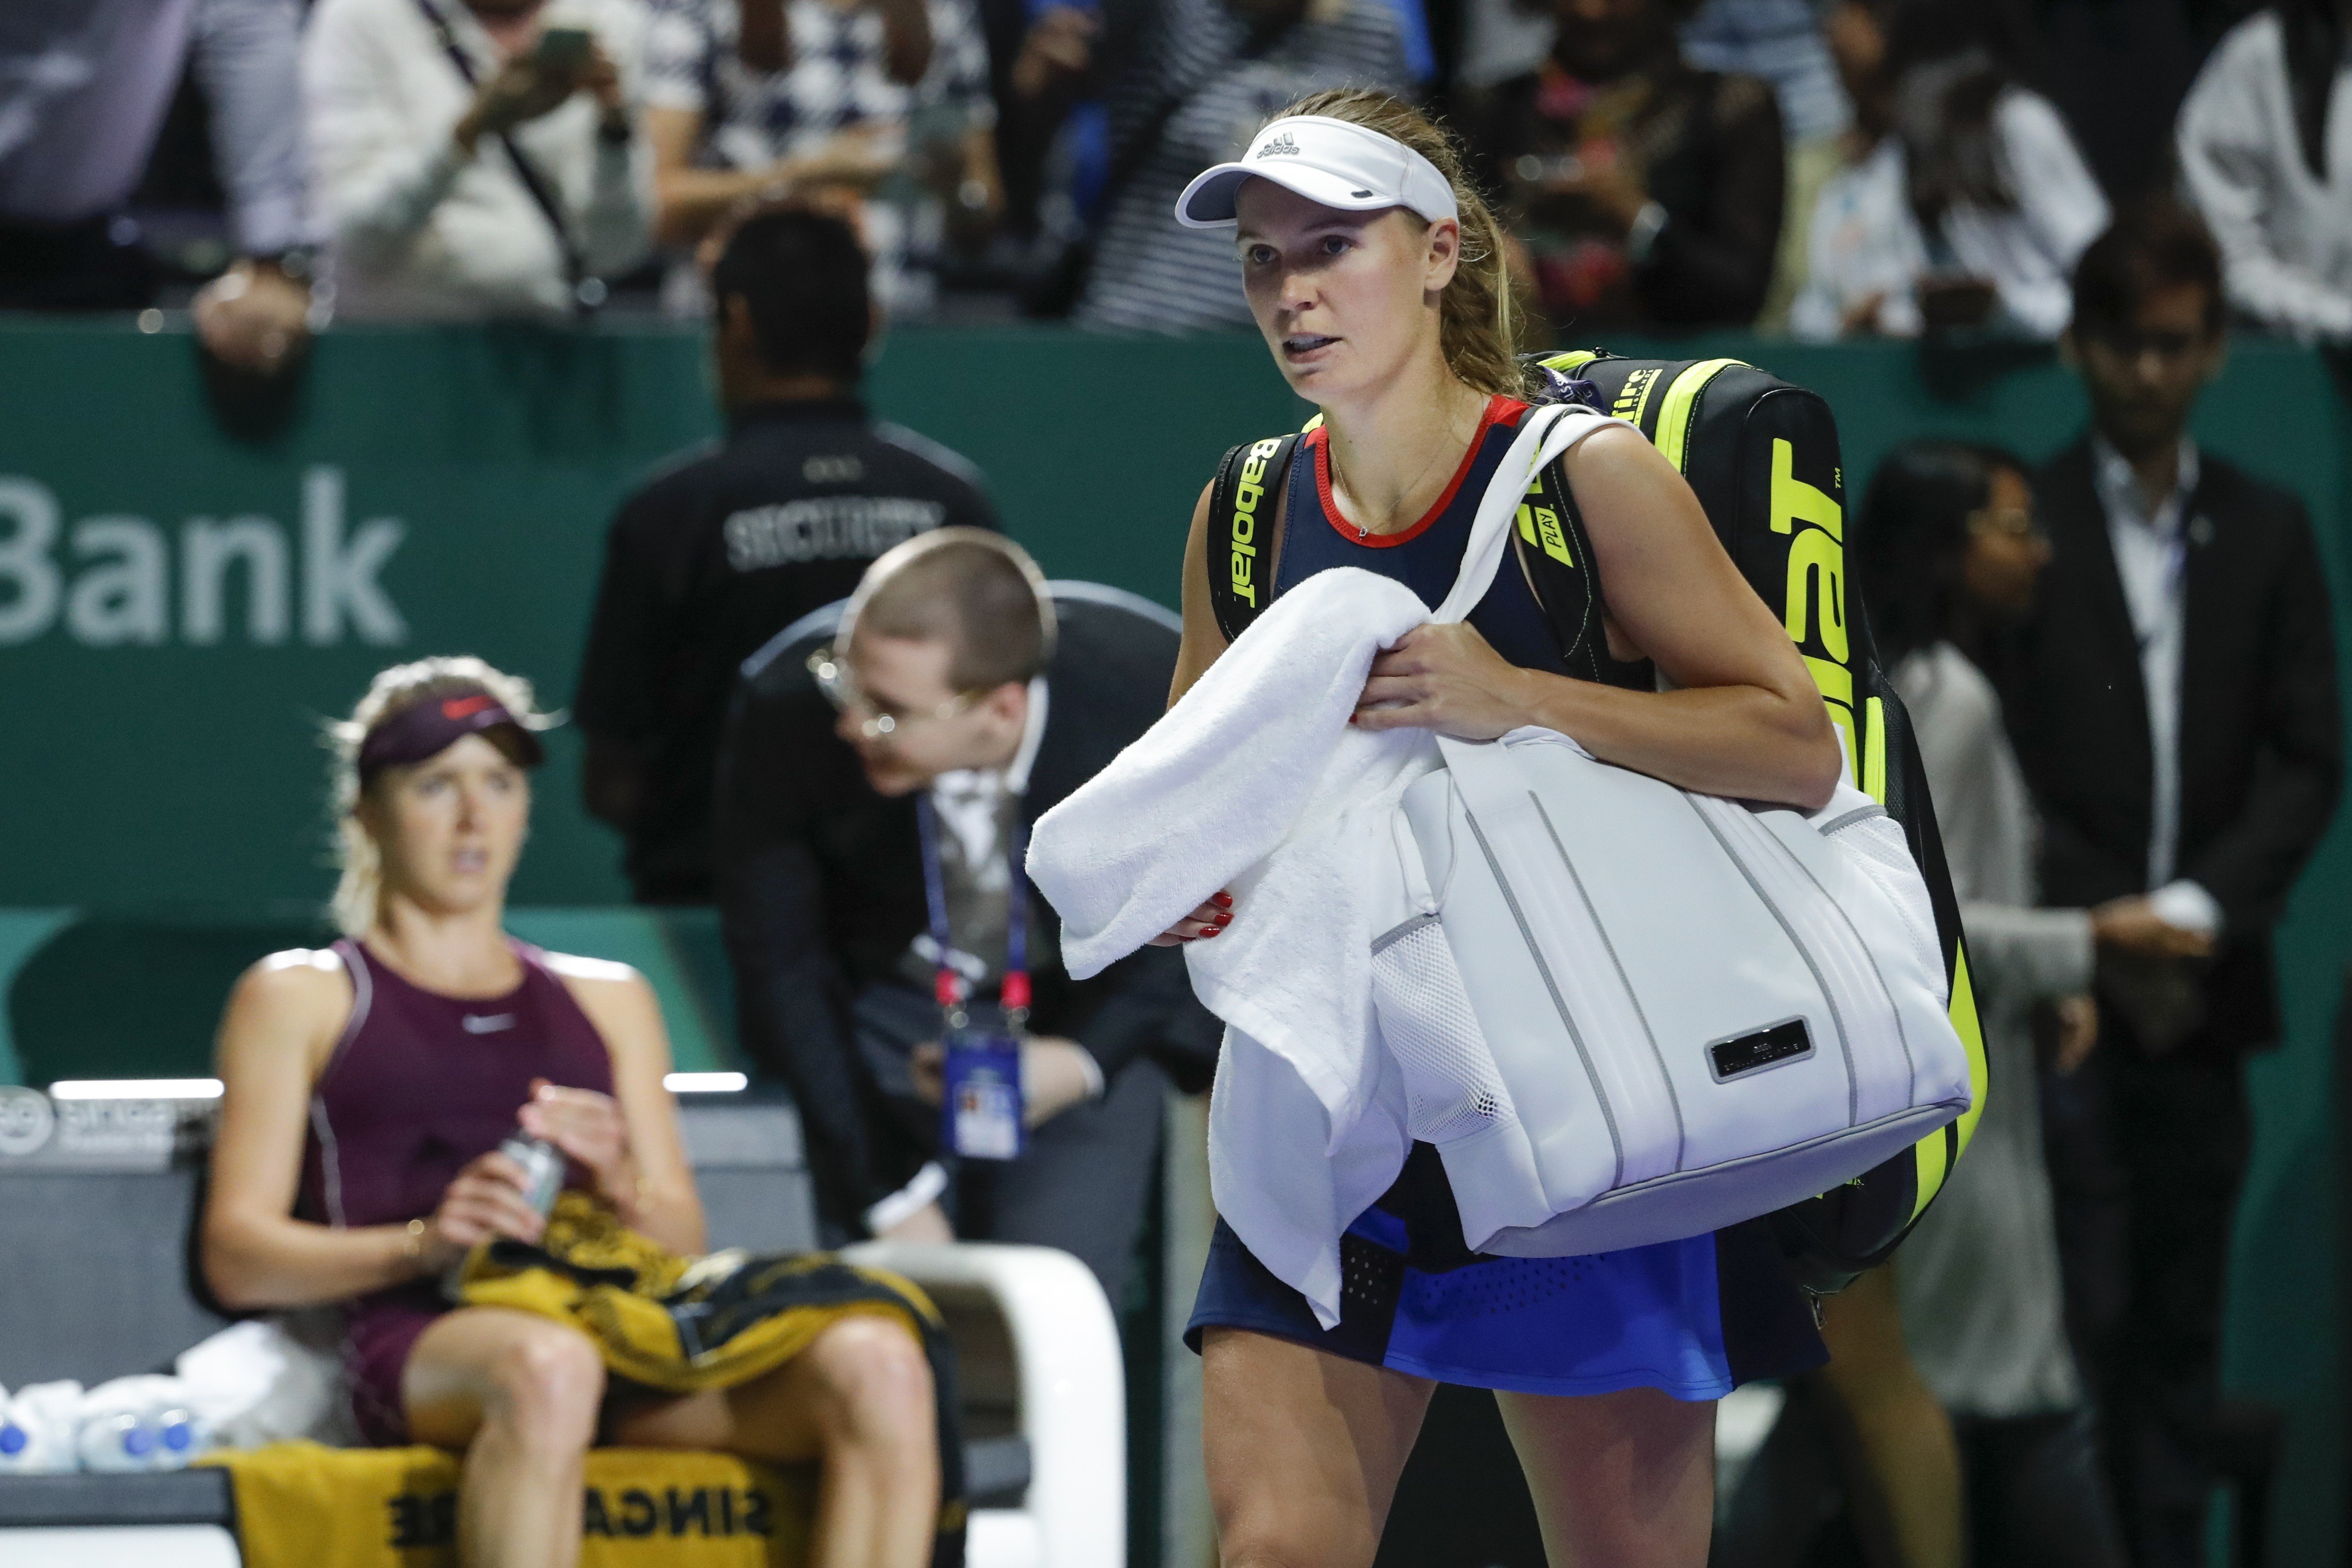 Caroline Wozniacki leaves after losing to Elina Svitolina at the WTA Finals in Singapore. Photo: AP